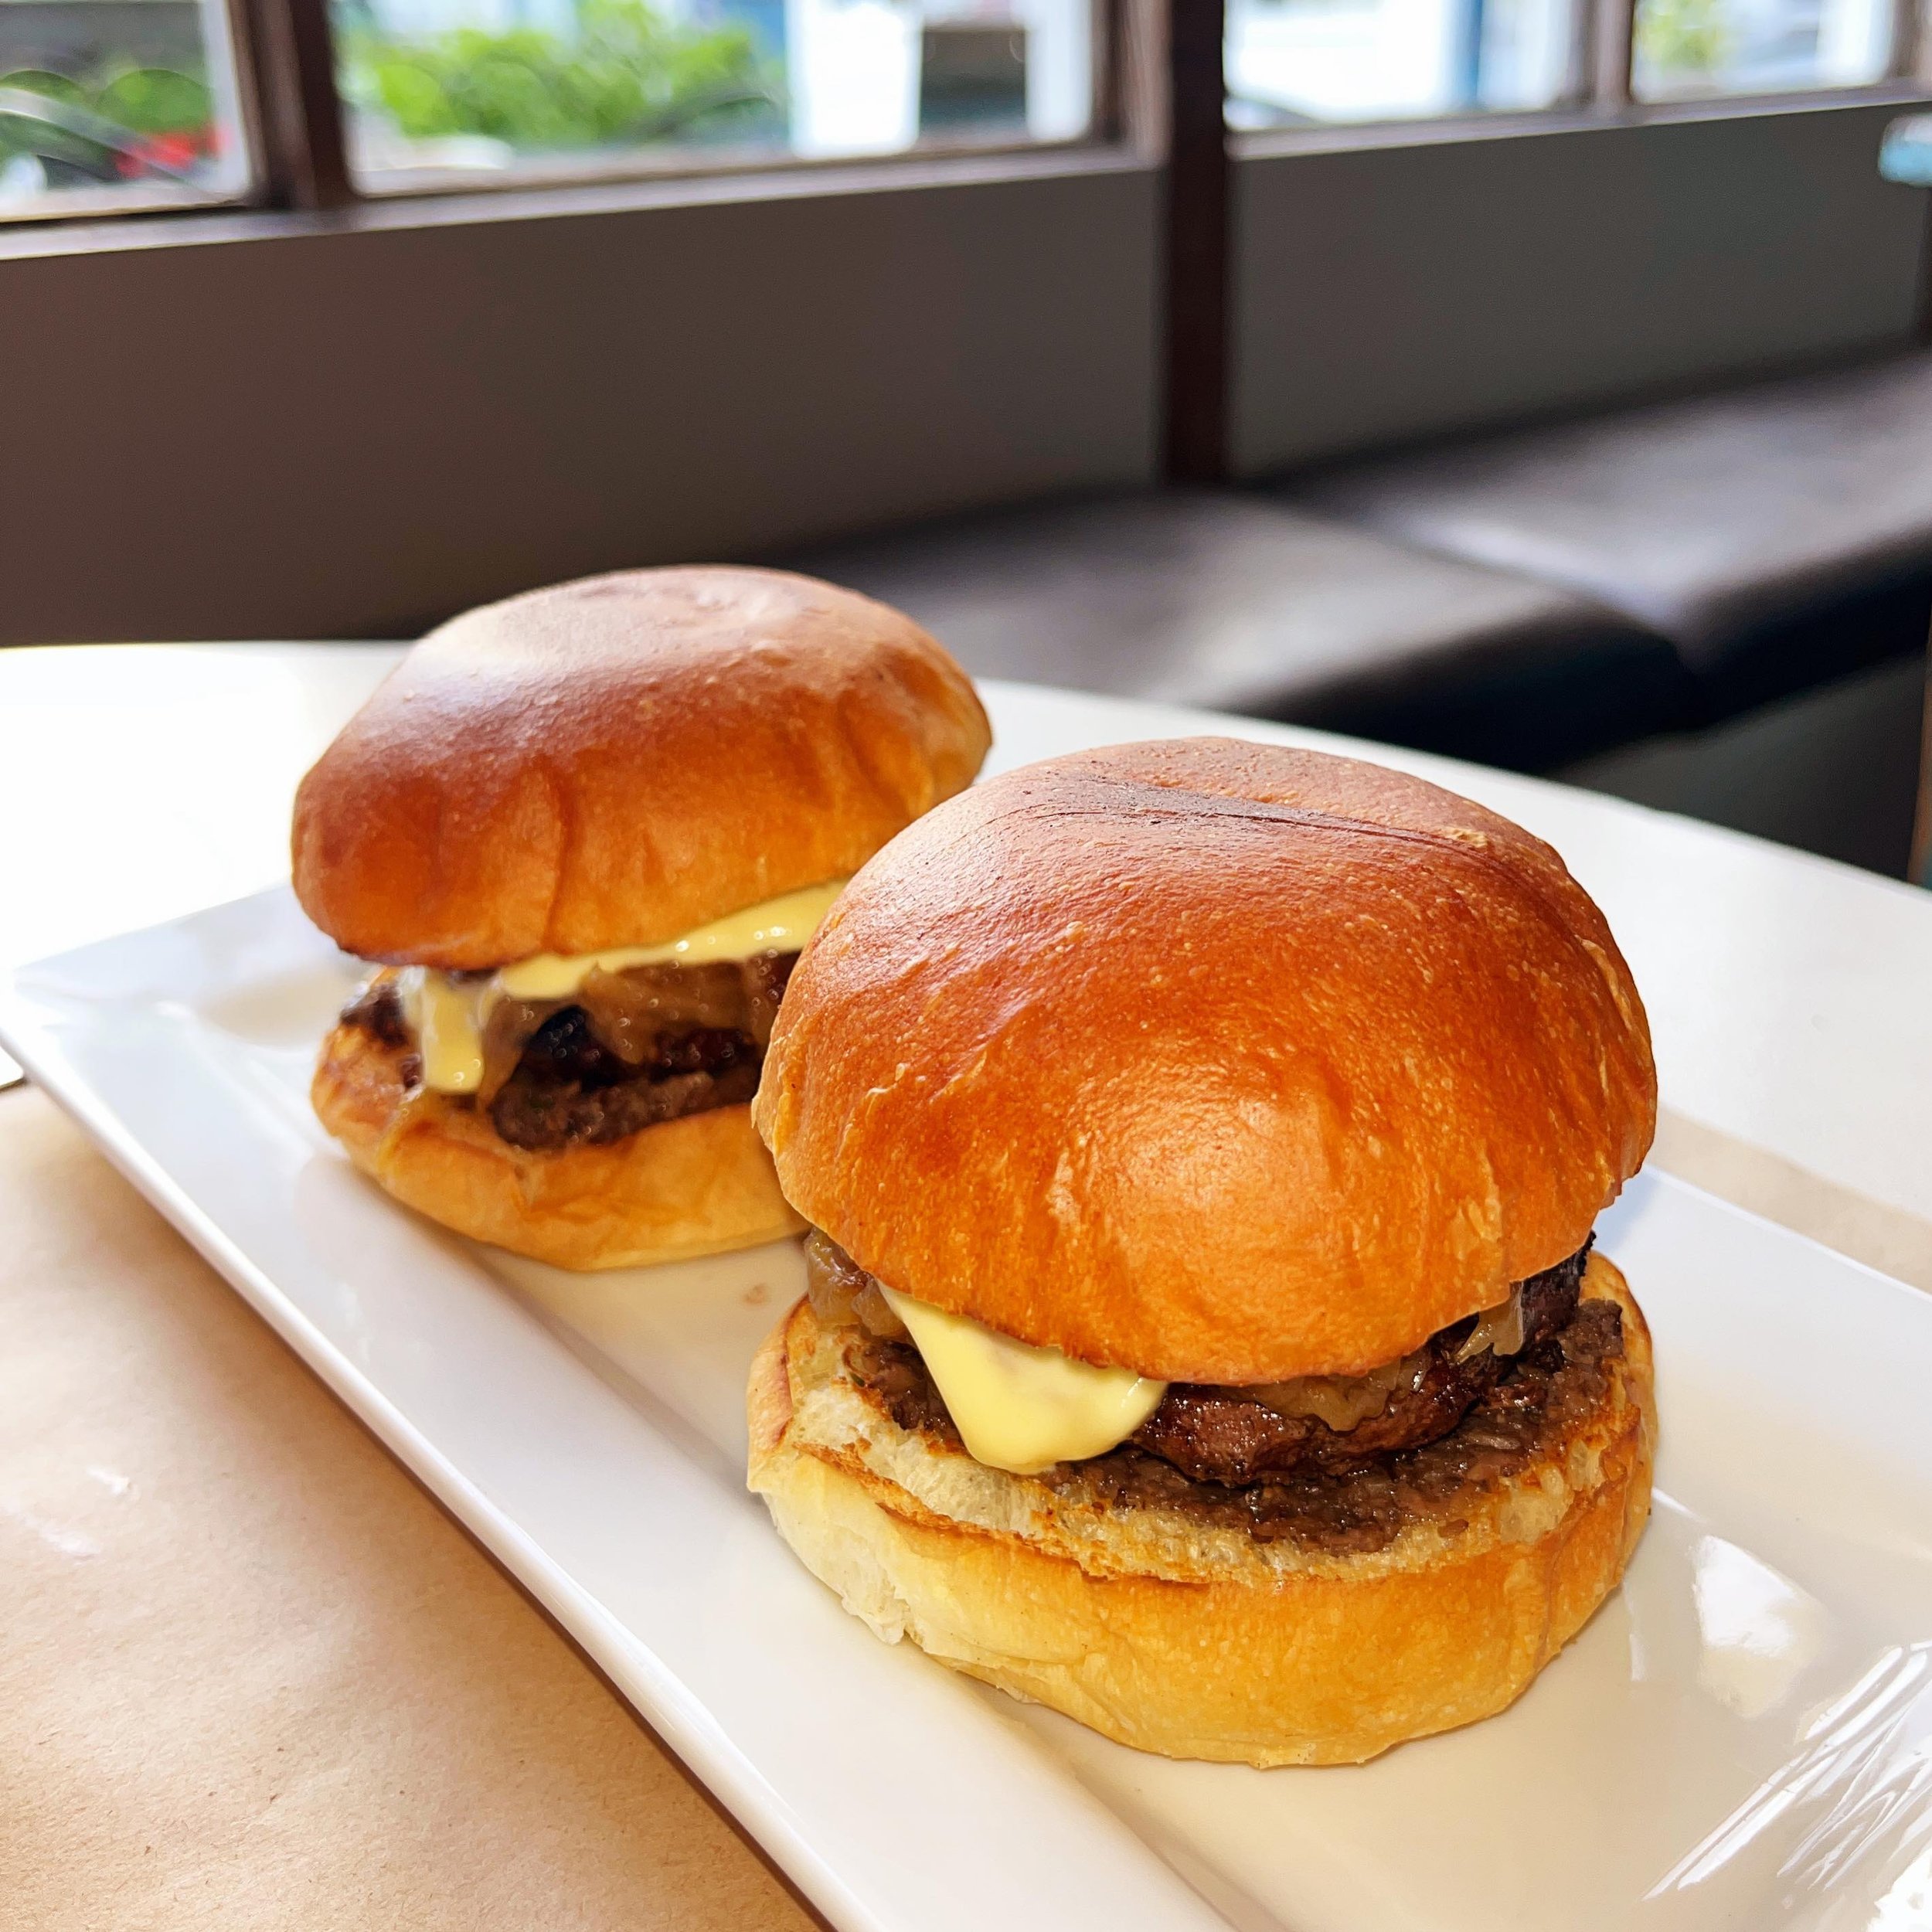 Our delicious sliders